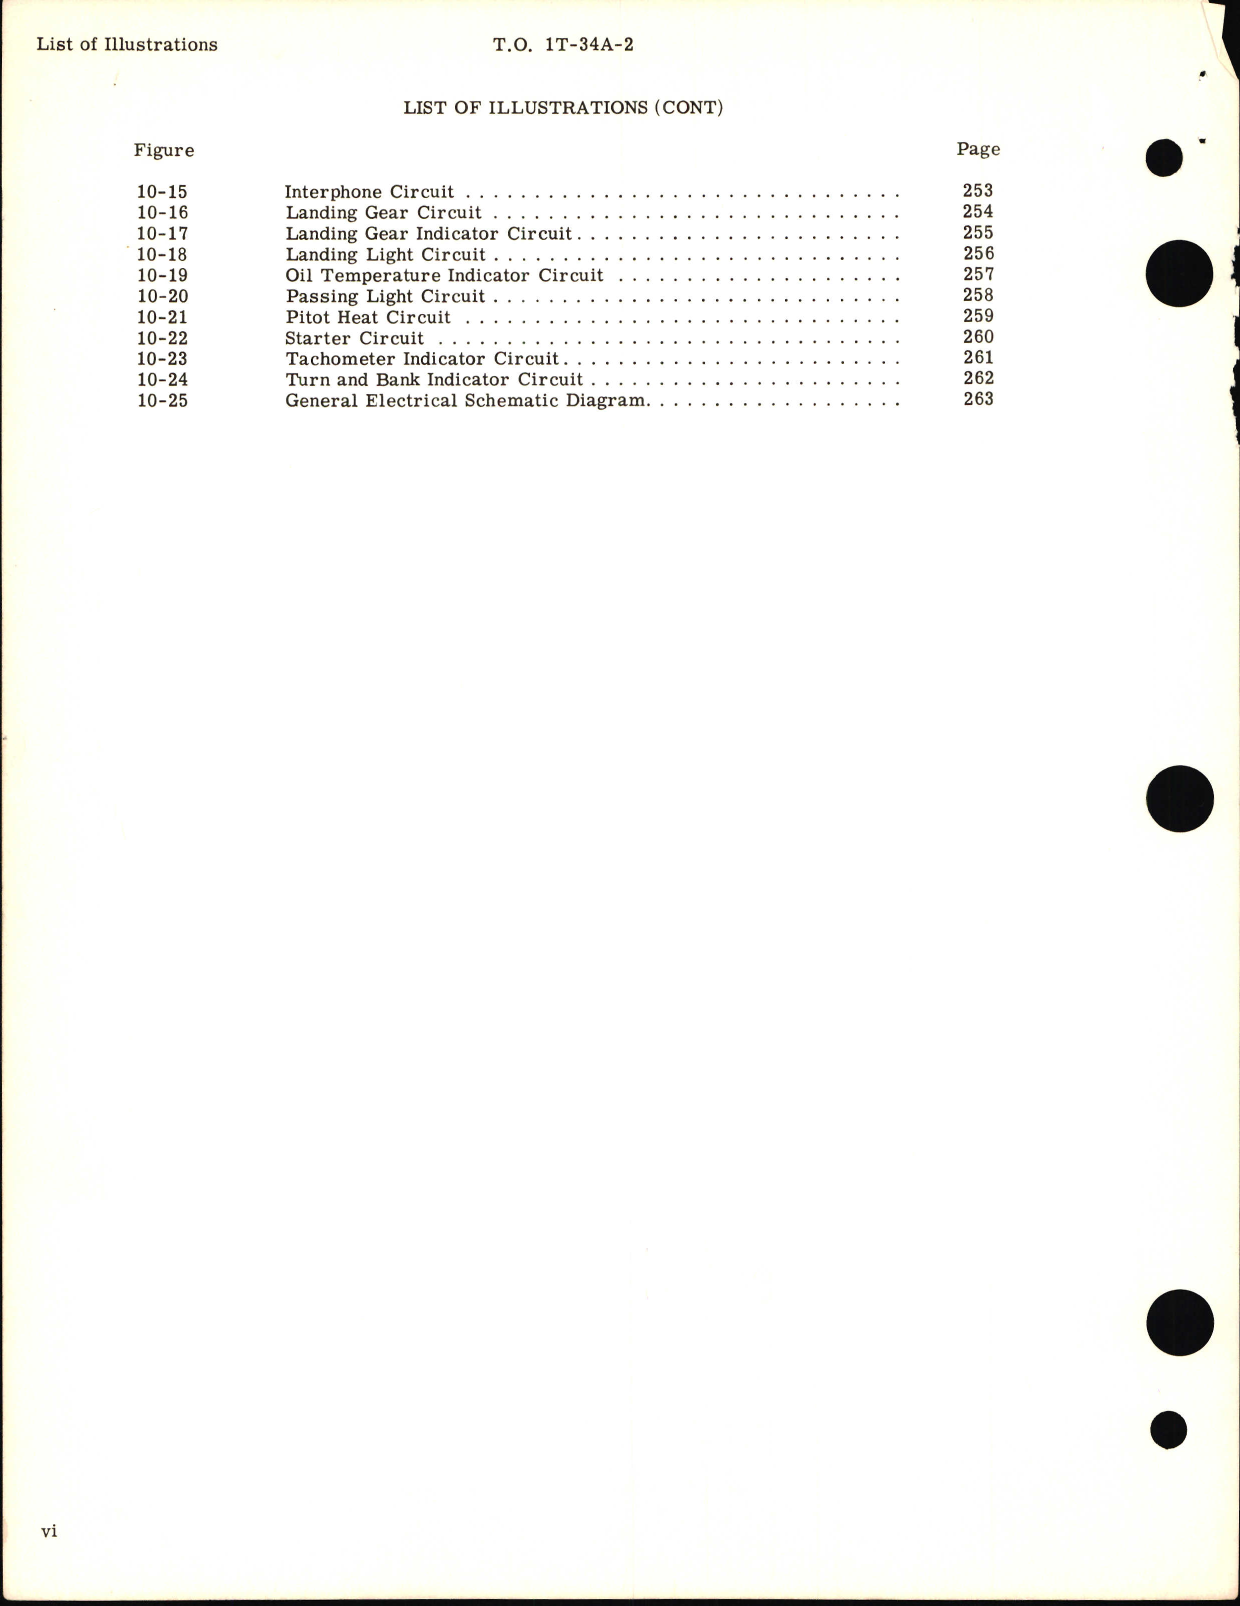 Sample page 8 from AirCorps Library document: Maintenance Manual for T-34A